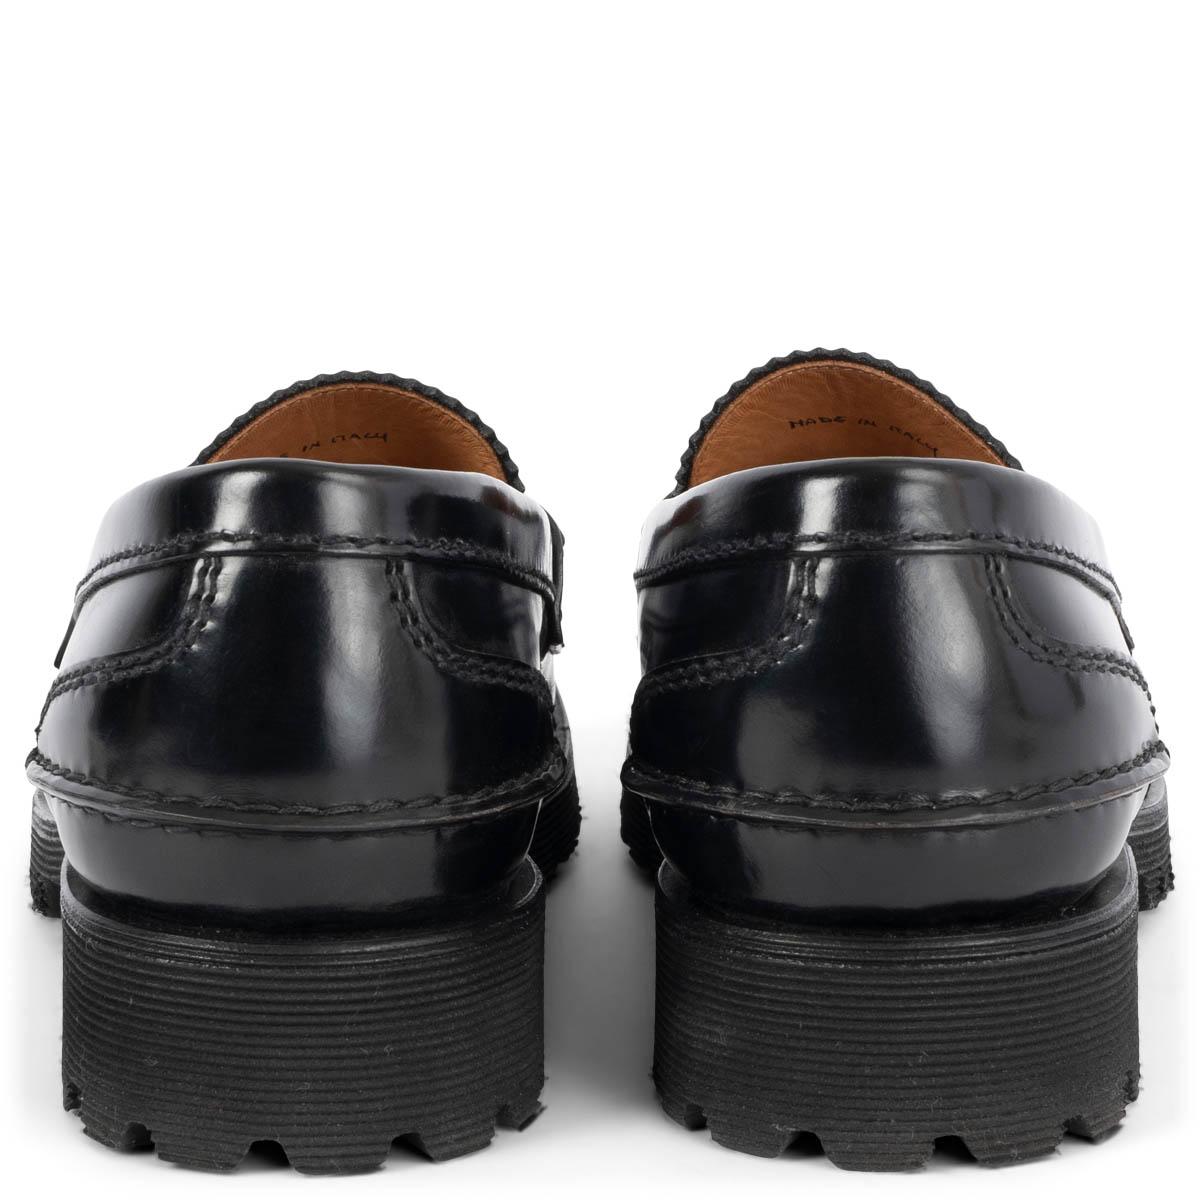 Women's CHURCH'S black shiny leather CHUNKY Loafers Flats Shoes 39.5